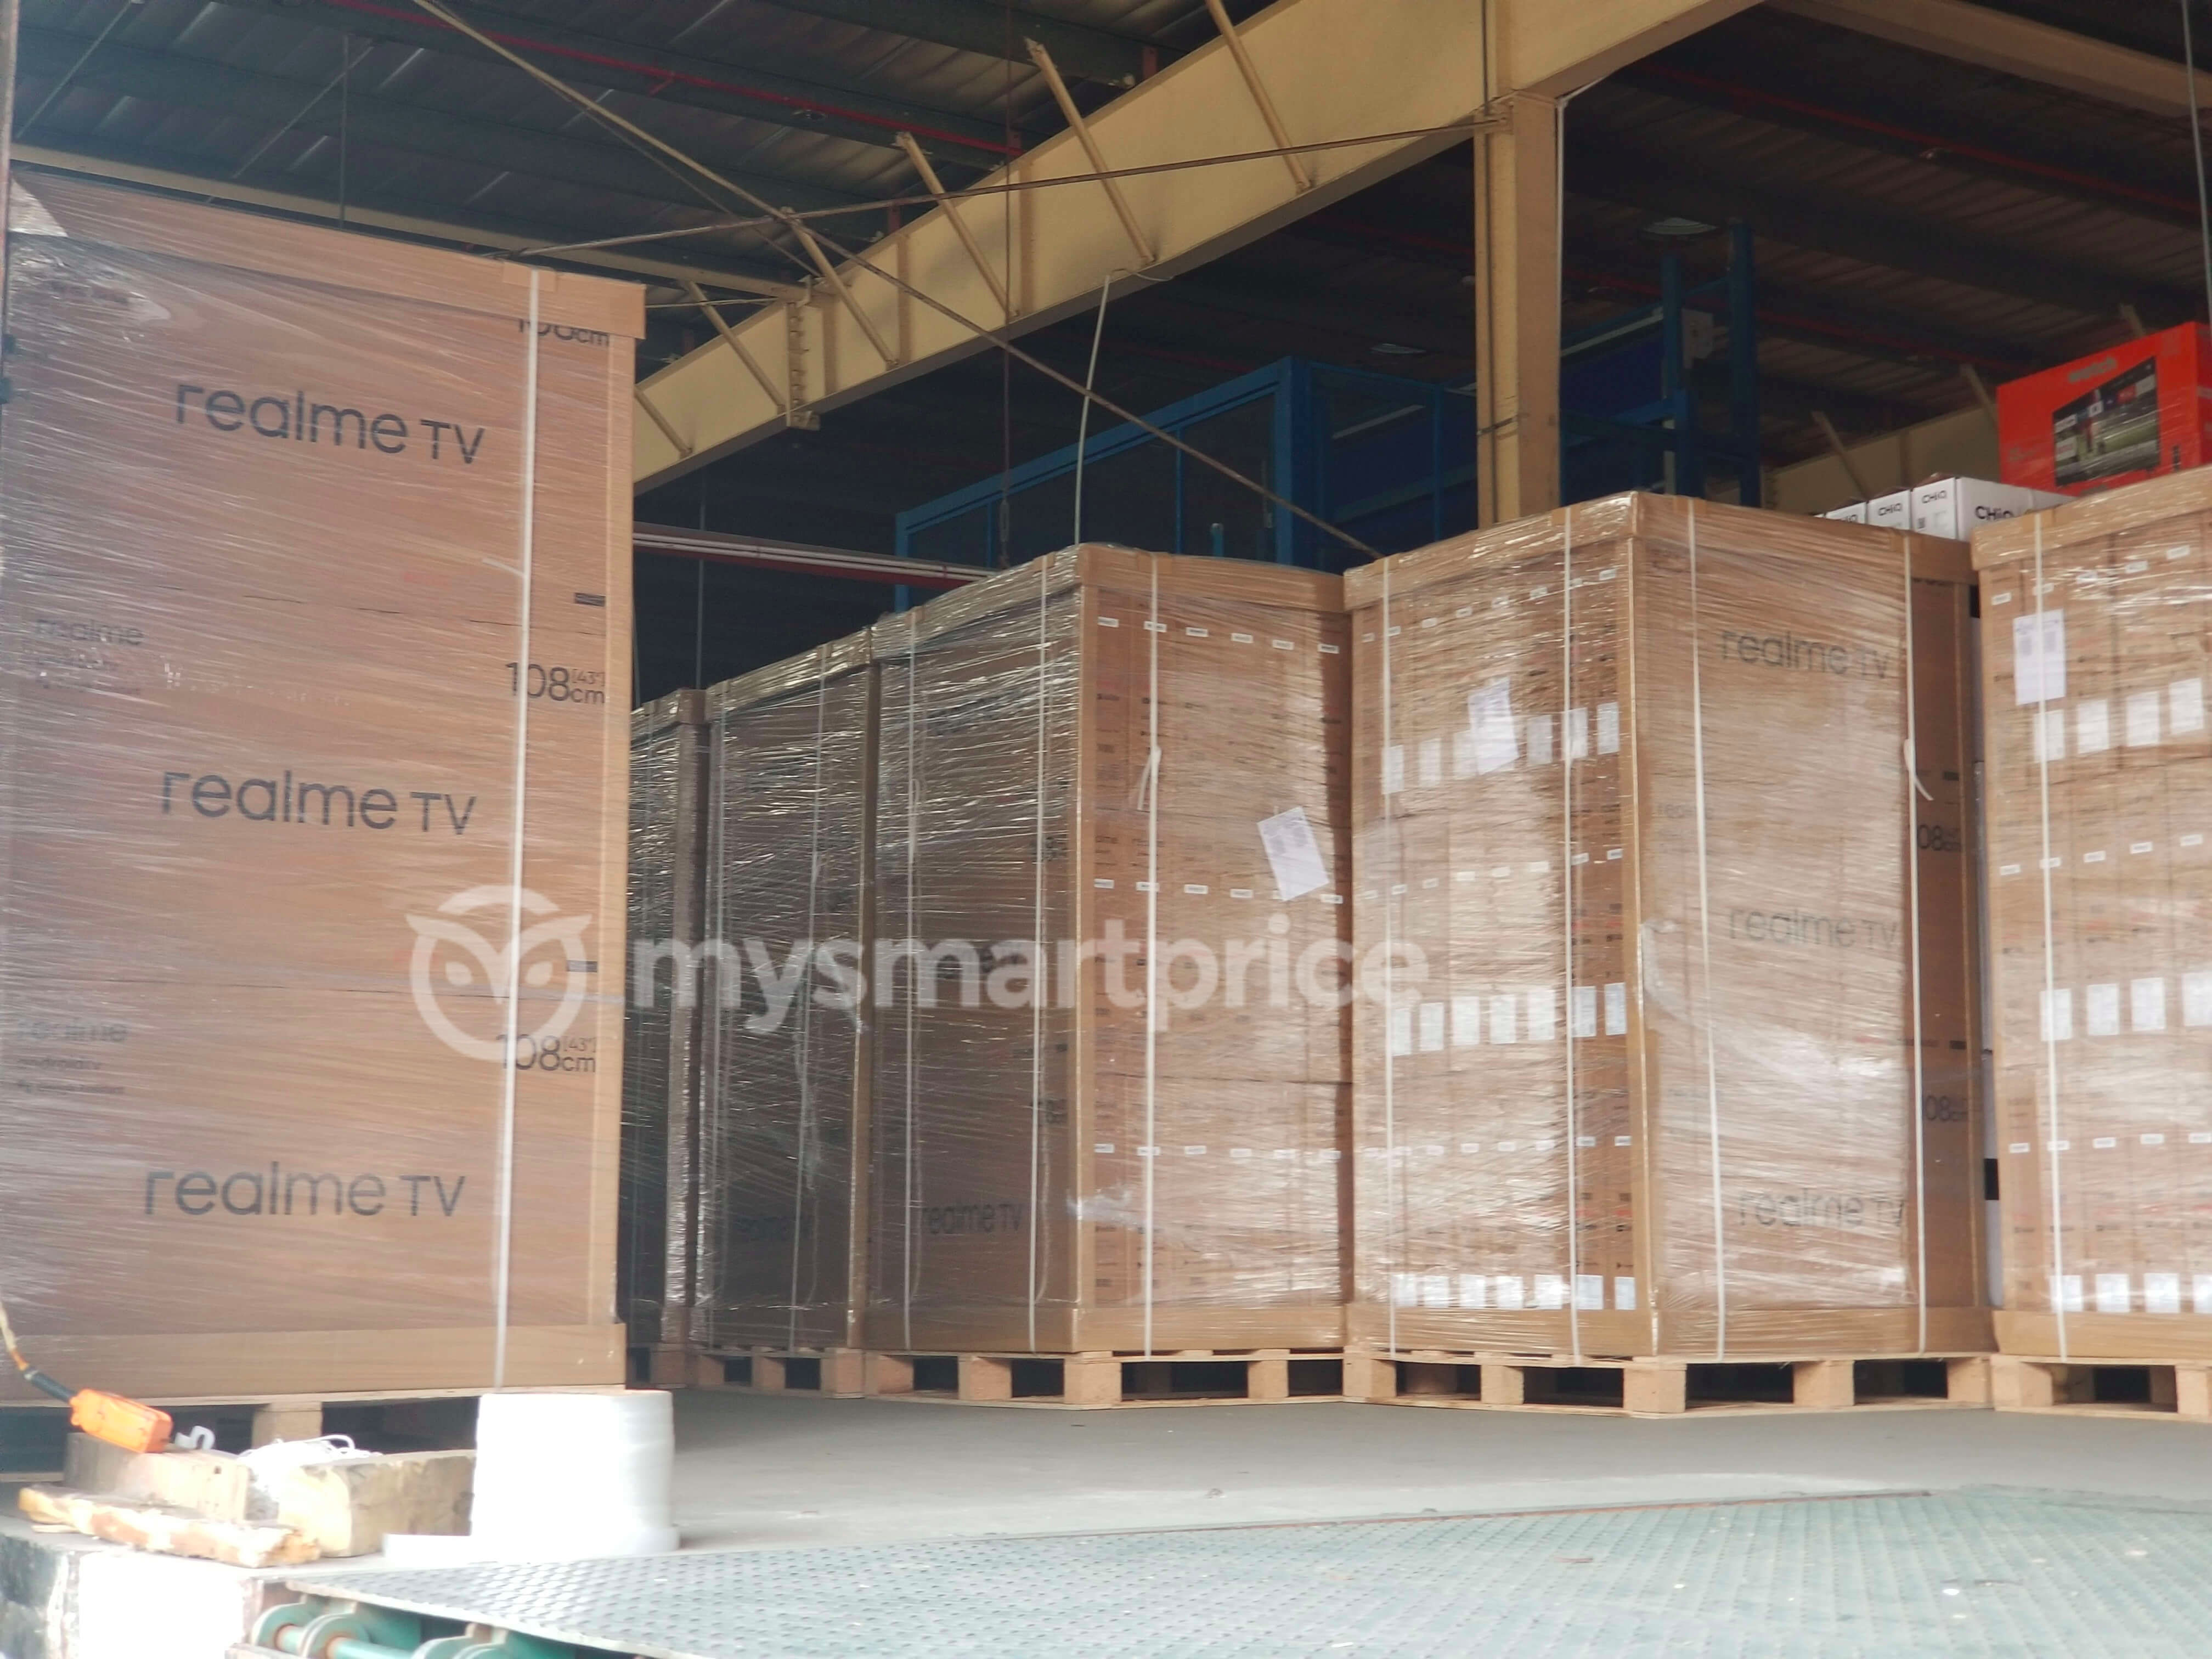 Realme TV retail packaging boxes stacked up in a warehouse